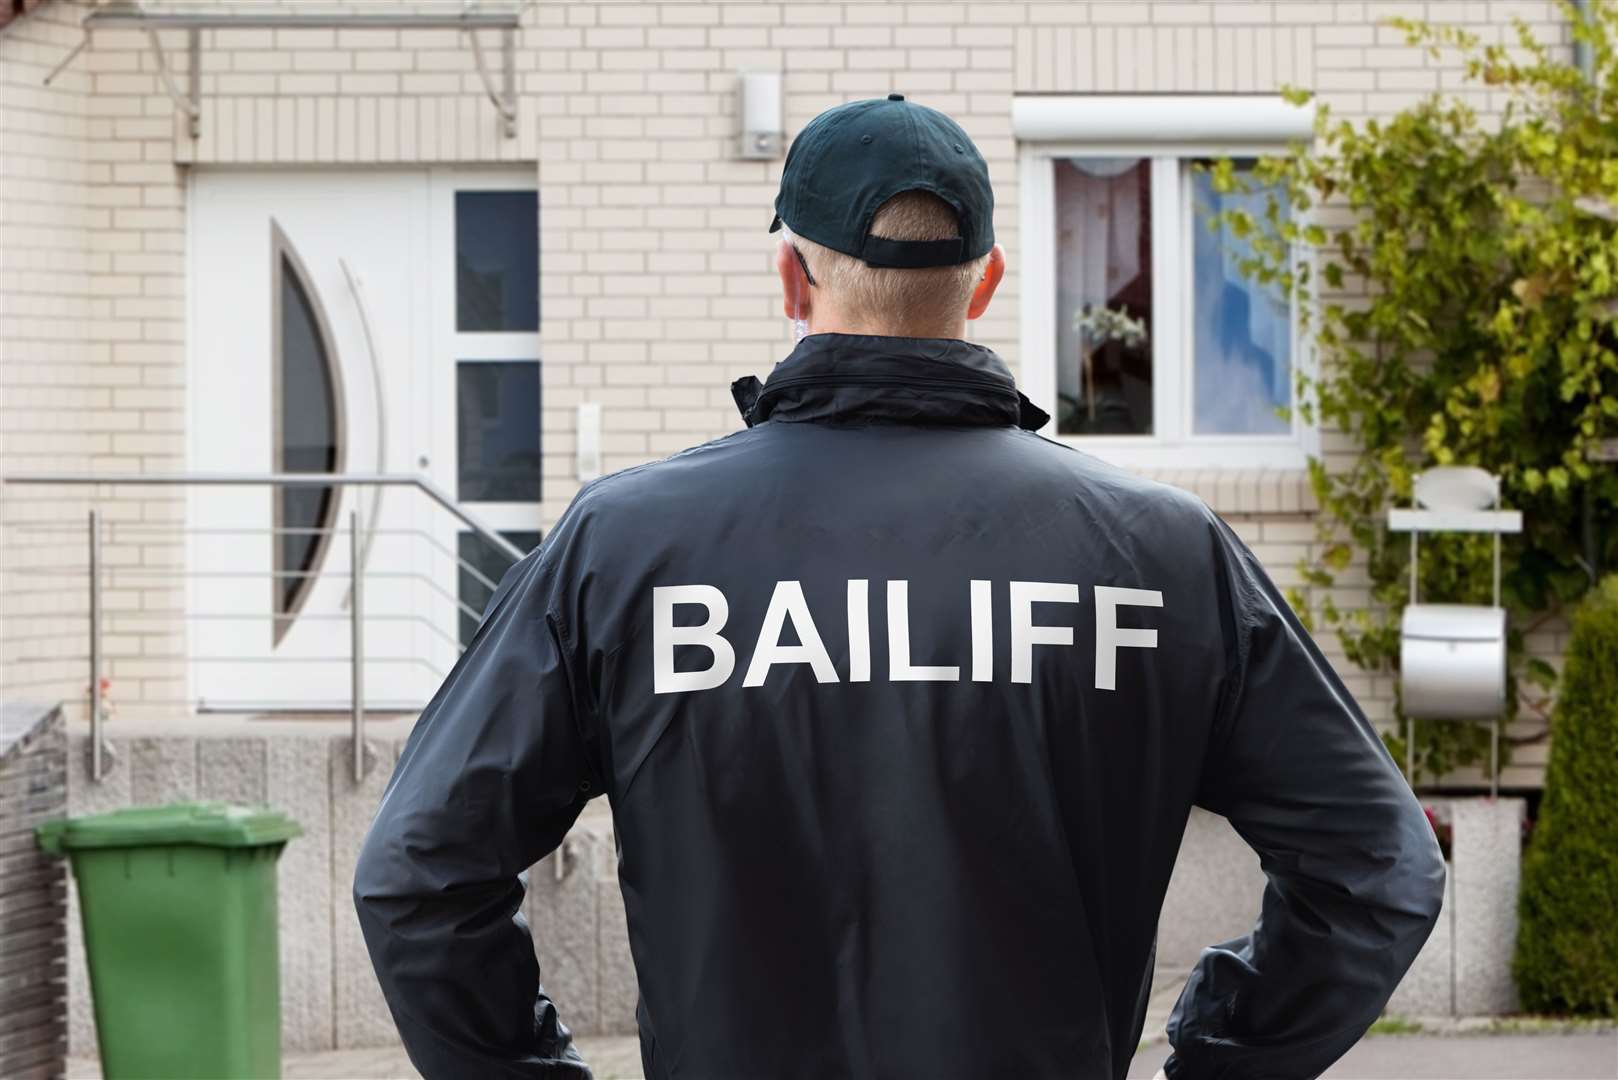 The courts service is warning people to be on the lookout for fraudsters pretending to be certified bailiffs